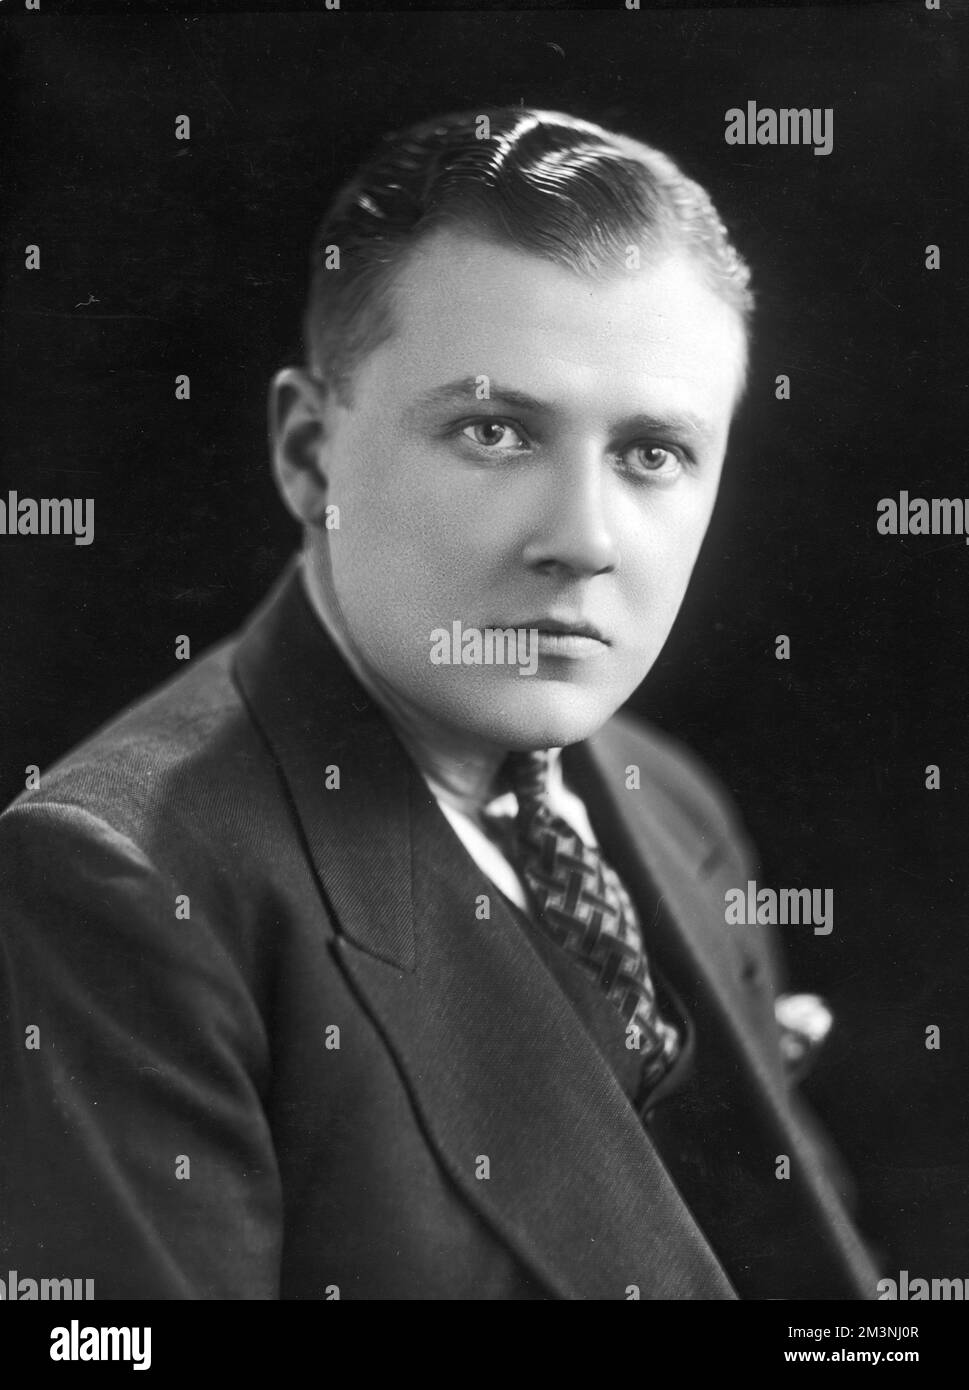 John Wesley Vivian Payne (1899 - 1969), British dance band leader whose band played at the Hotel Cecil in London during the 1920s and later for the BBC.     Date: c. 1928 Stock Photo